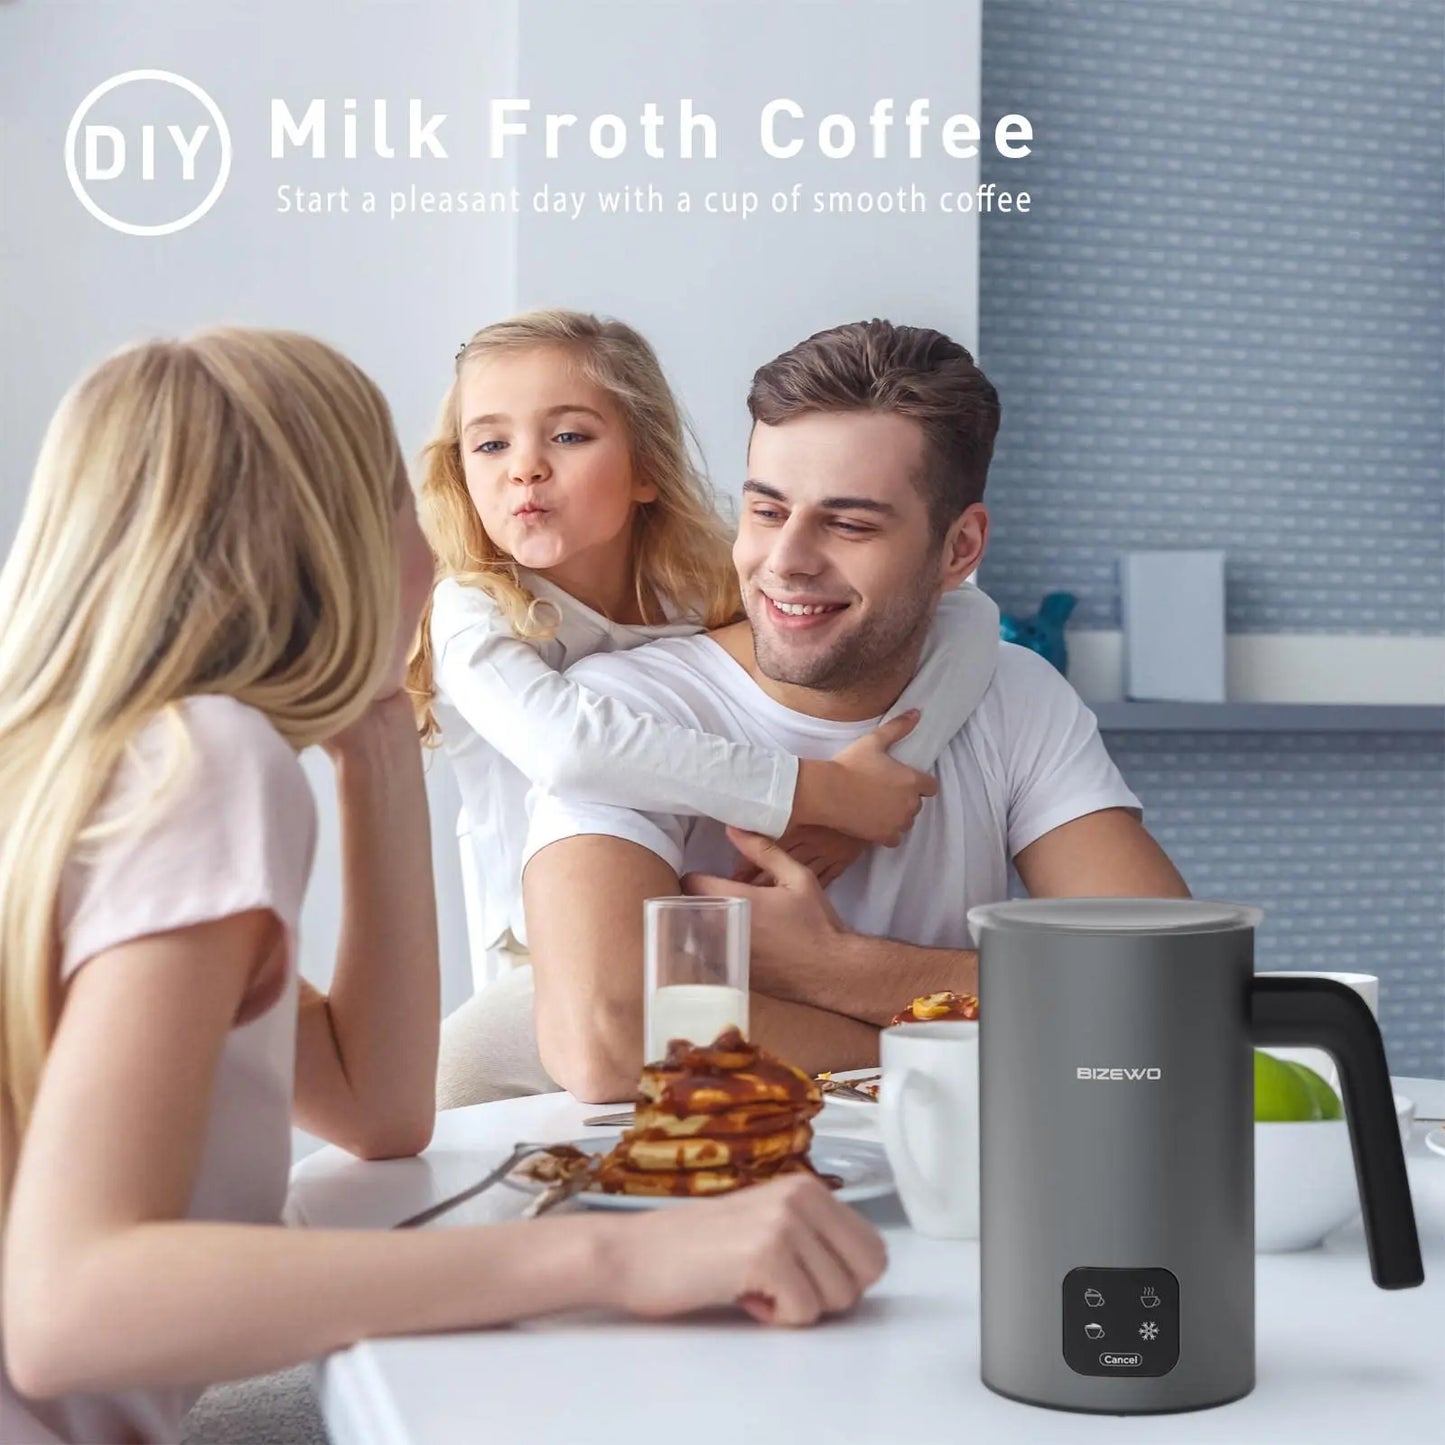 https://bizewohome.com/cdn/shop/files/Frother-for-Coffee_-Milk-Frother_-4-IN-1-Automatic-Warm-and-Cold-Milk-Foamer_-BIZEWO-Stainless-Steel-Milk-Steamer-for-Latte_-Cappuccinos_-Macchiato_-Hot-Chocolate-Milk-with-LED-Touch_fcfd4d91-ed16-4d00-89bb-ce33256abe17_1445x.jpg?v=1690162805